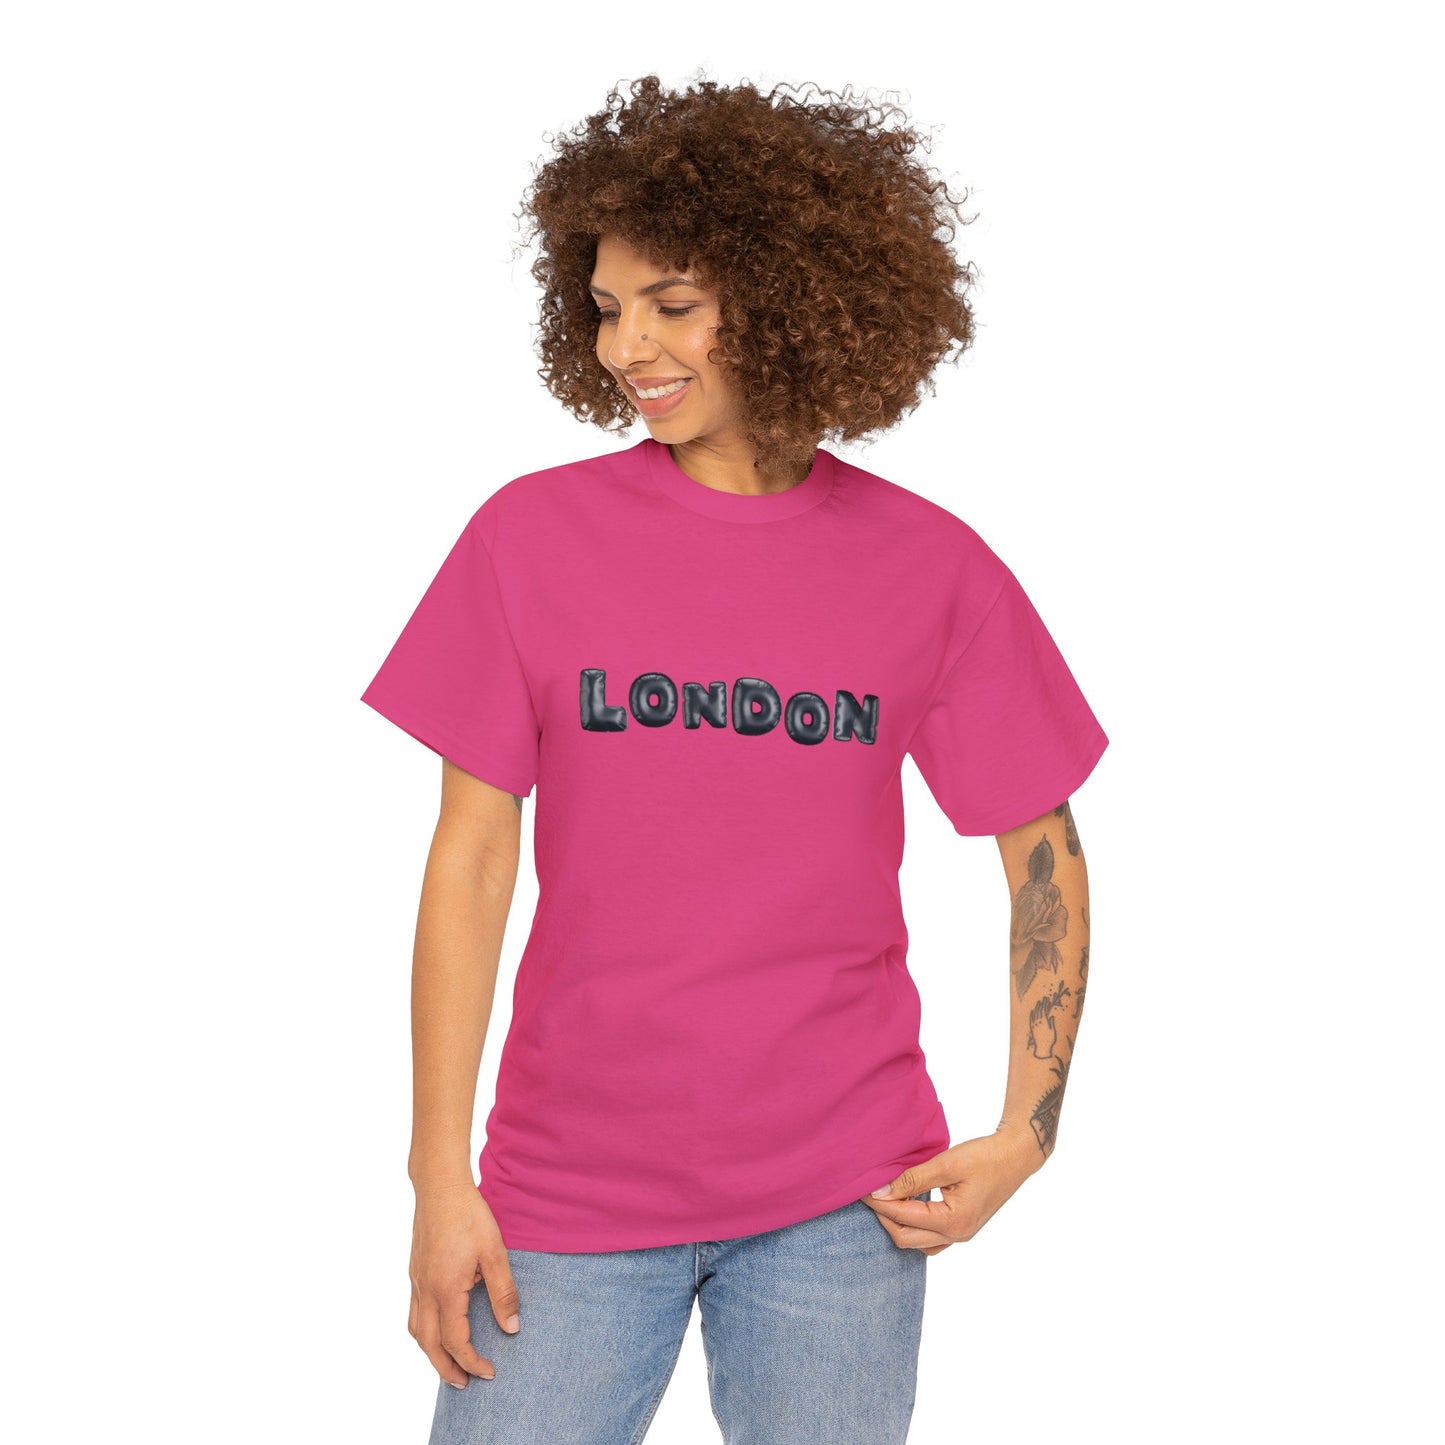 Text LONDON T-shirt Unisex Heavy Cotton Tee Simple Text London Logo for Fans of London, United Kingdom